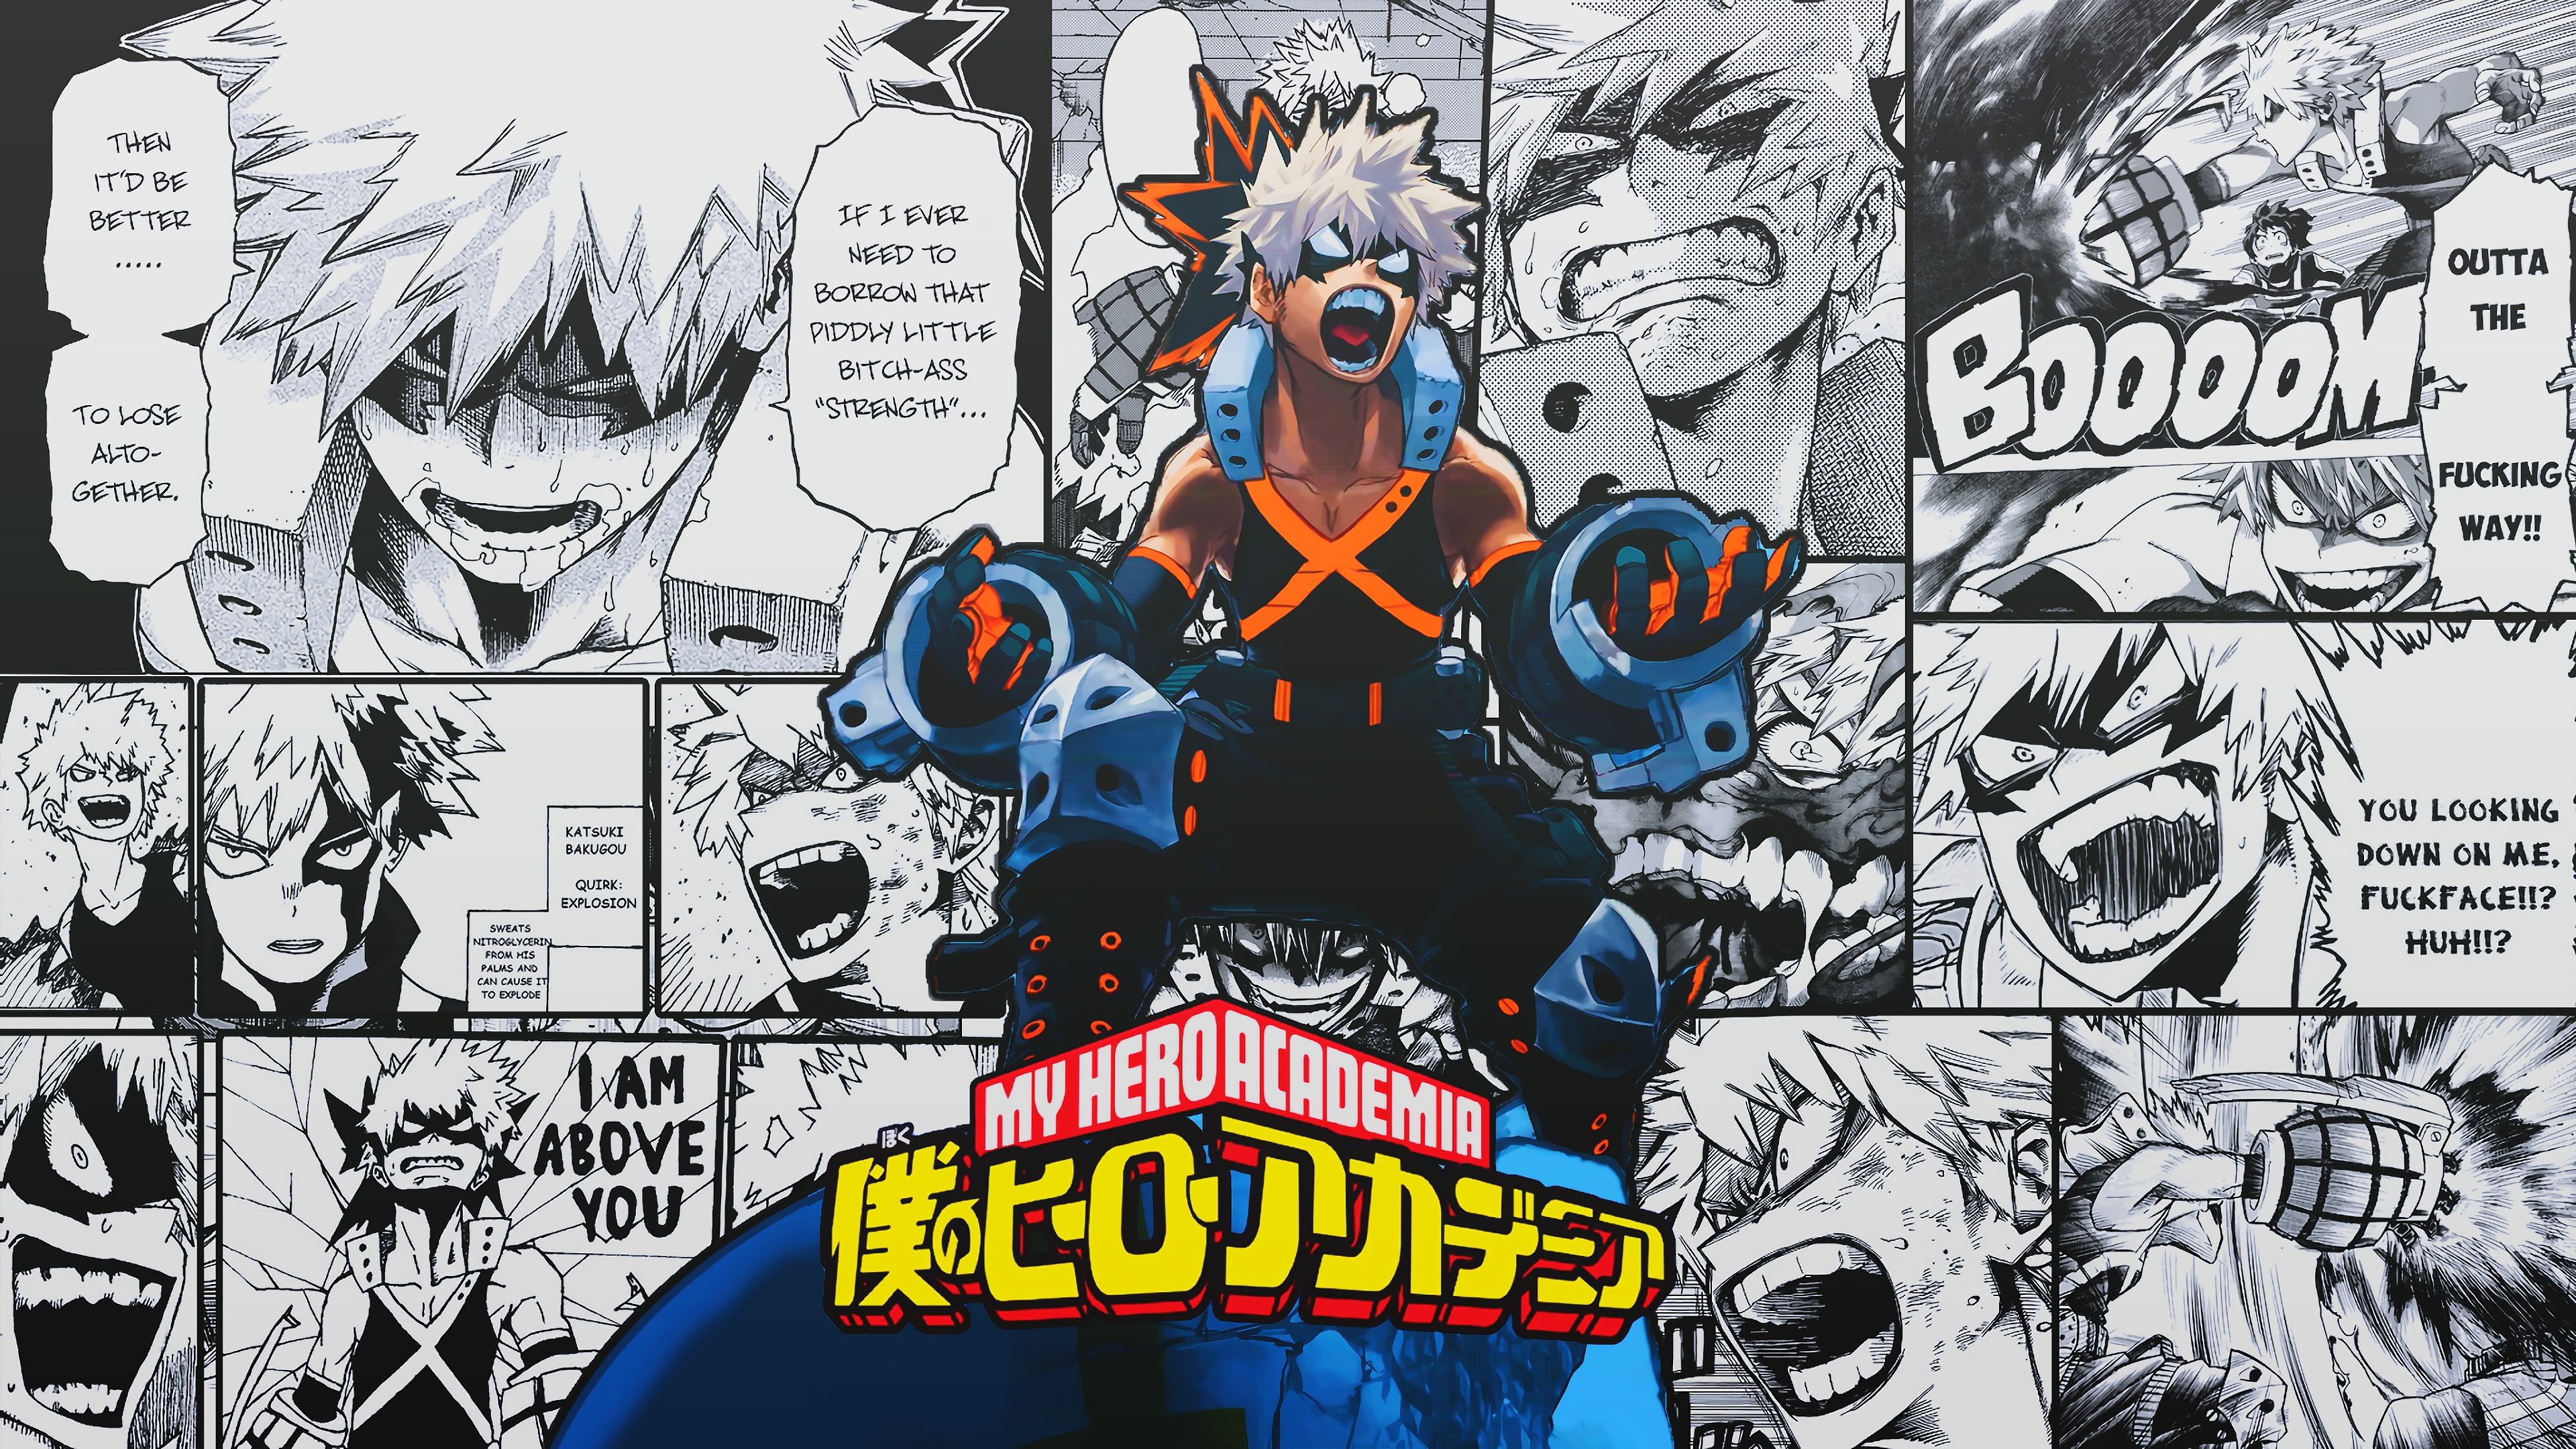 My Hero Academia Manga Wallpapers Wallpaper Cave See more ideas about anime, anime wallpaper, cool wallpapers for. my hero academia manga wallpapers